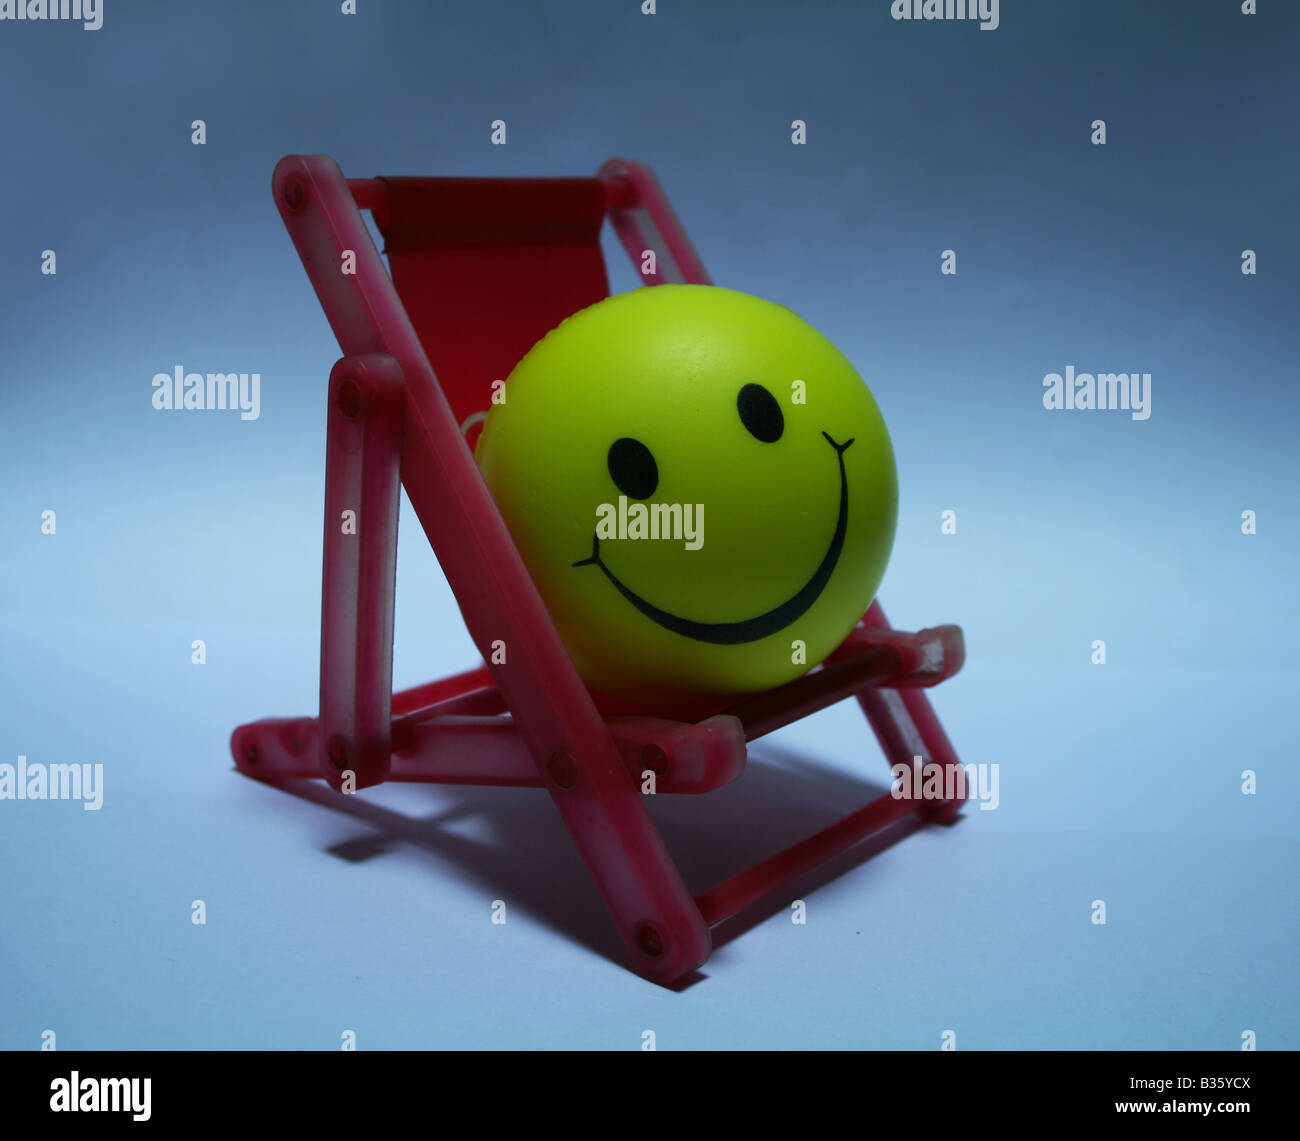 Yellow Smiley ball enjoying by relaxing himself on a red Easy Chair in the moonlight thinking of some fond memories Stock Photo